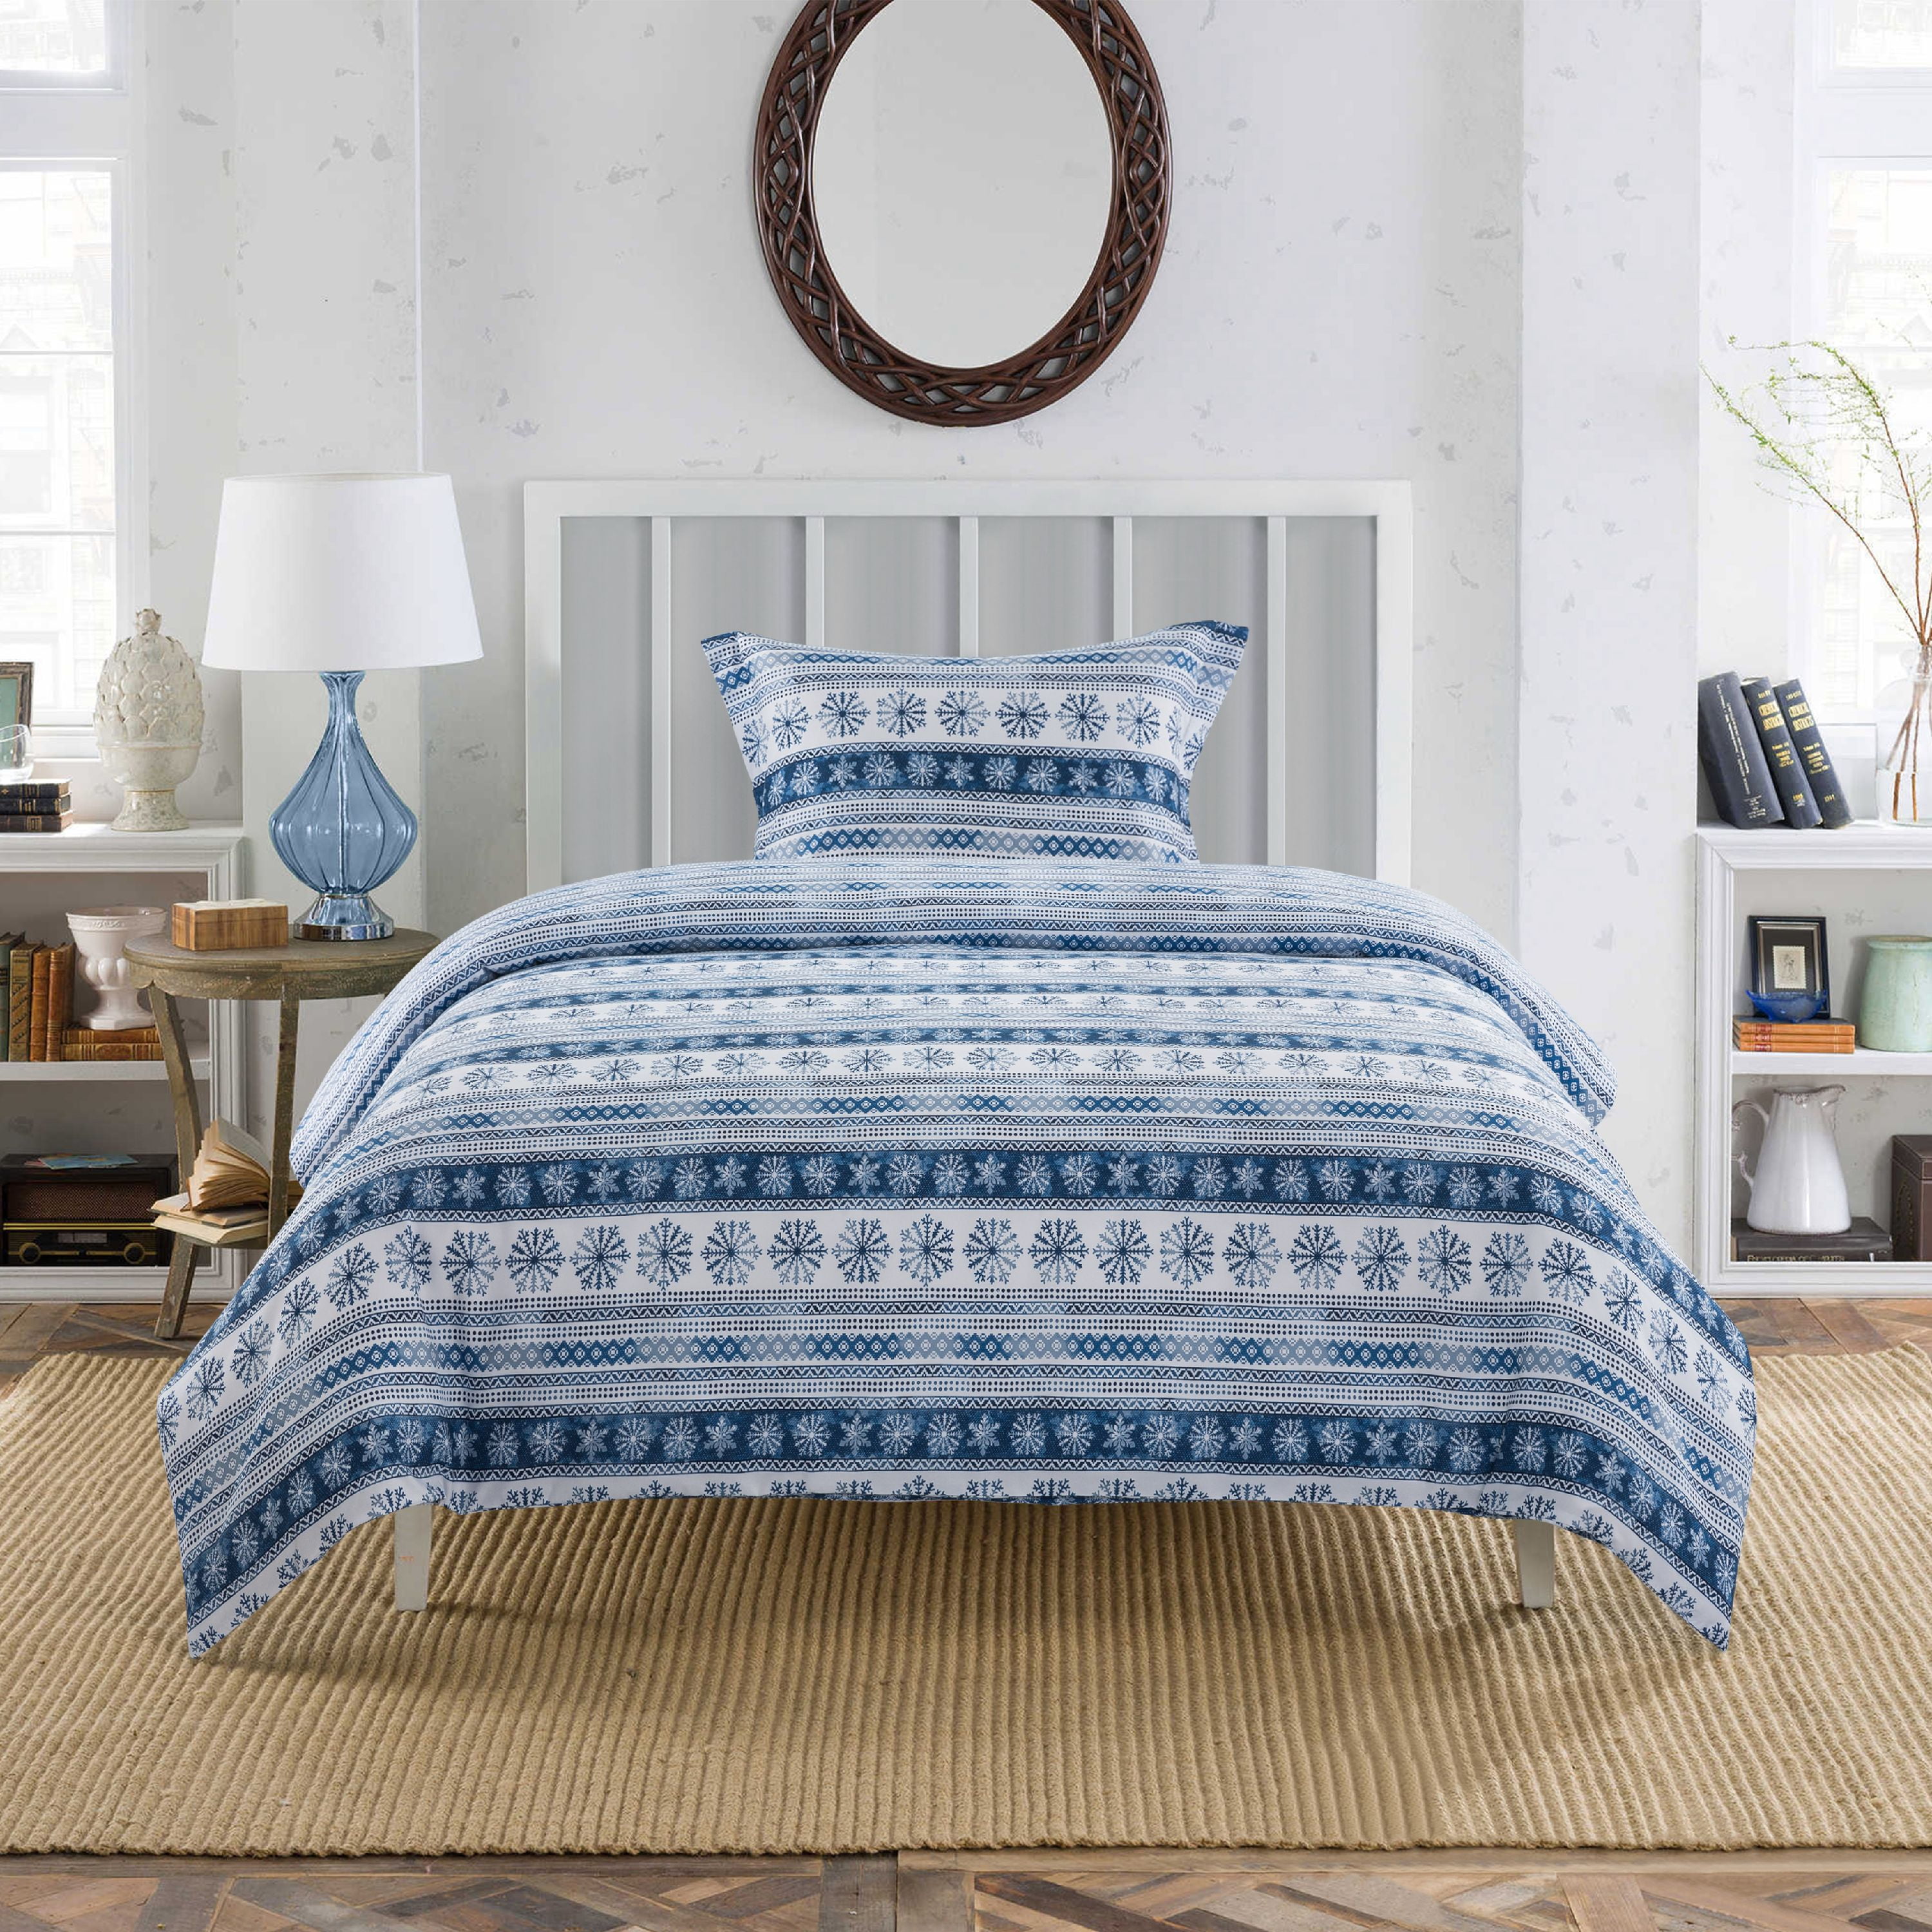 Mainstays 2 Piece Bedding Sets, Twin-XL with Duvet Cover, Shams 